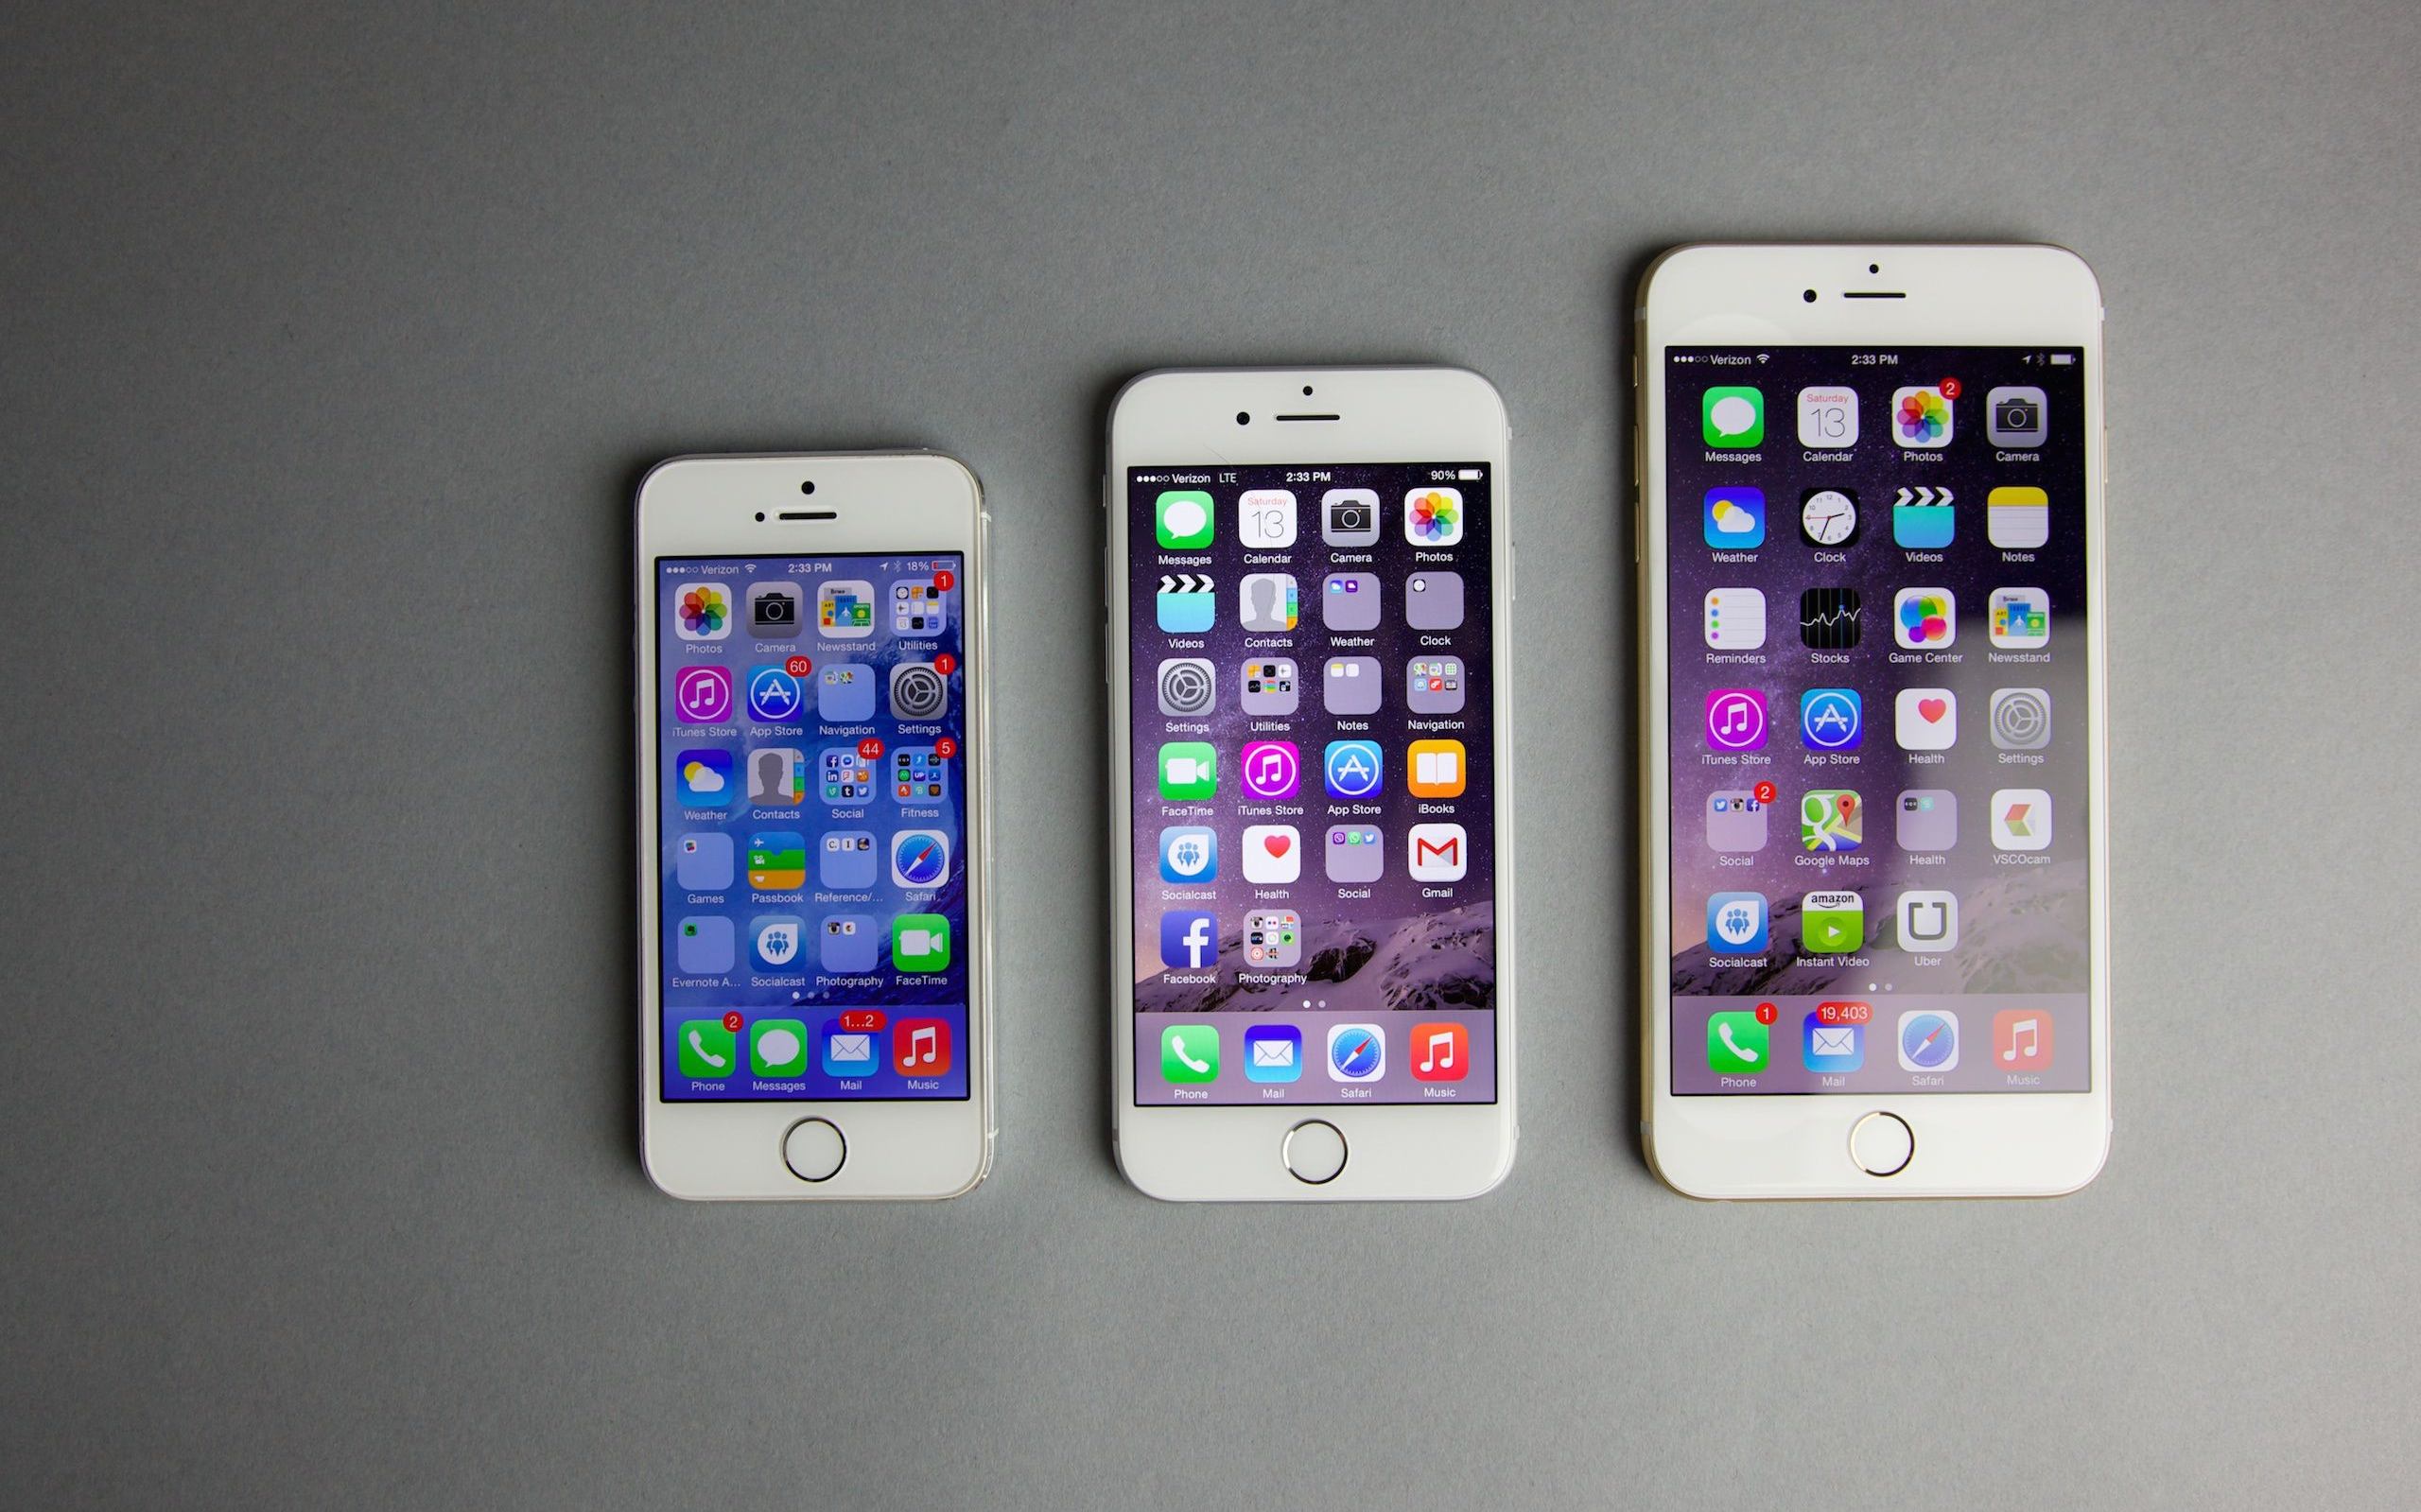 iPhone 6 Plus Review: Why It's One of our Favorite Phablets | Digital Trends